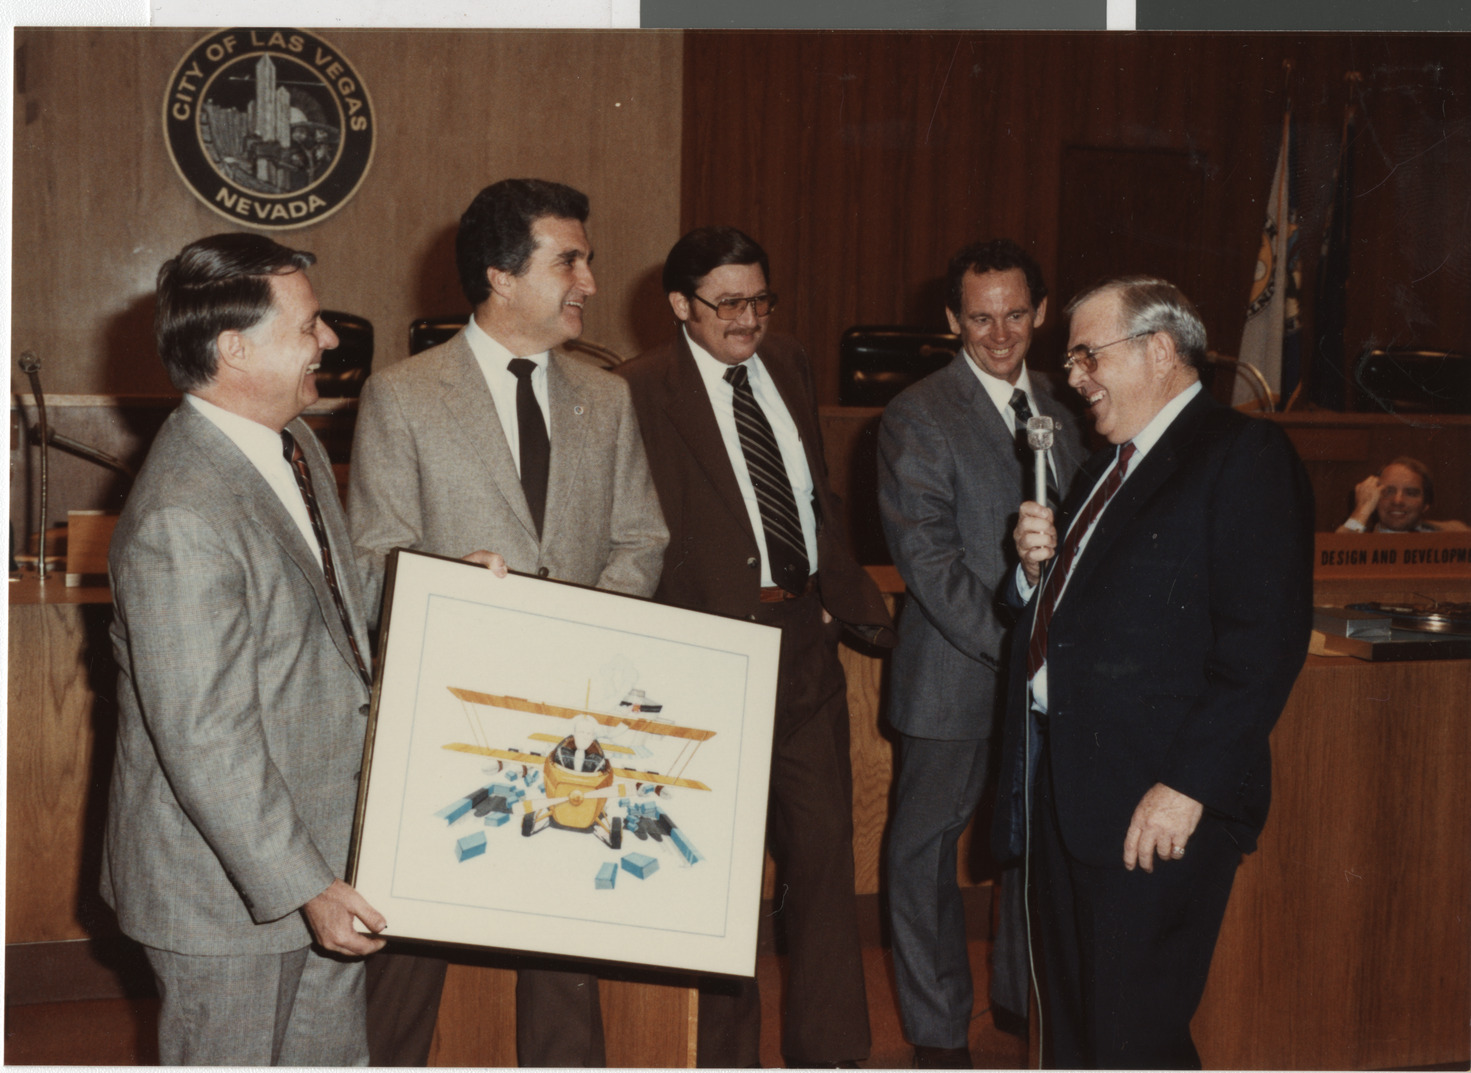 Photograph of Ron Lurie holding a framed print of a bi-plane, circa 1978